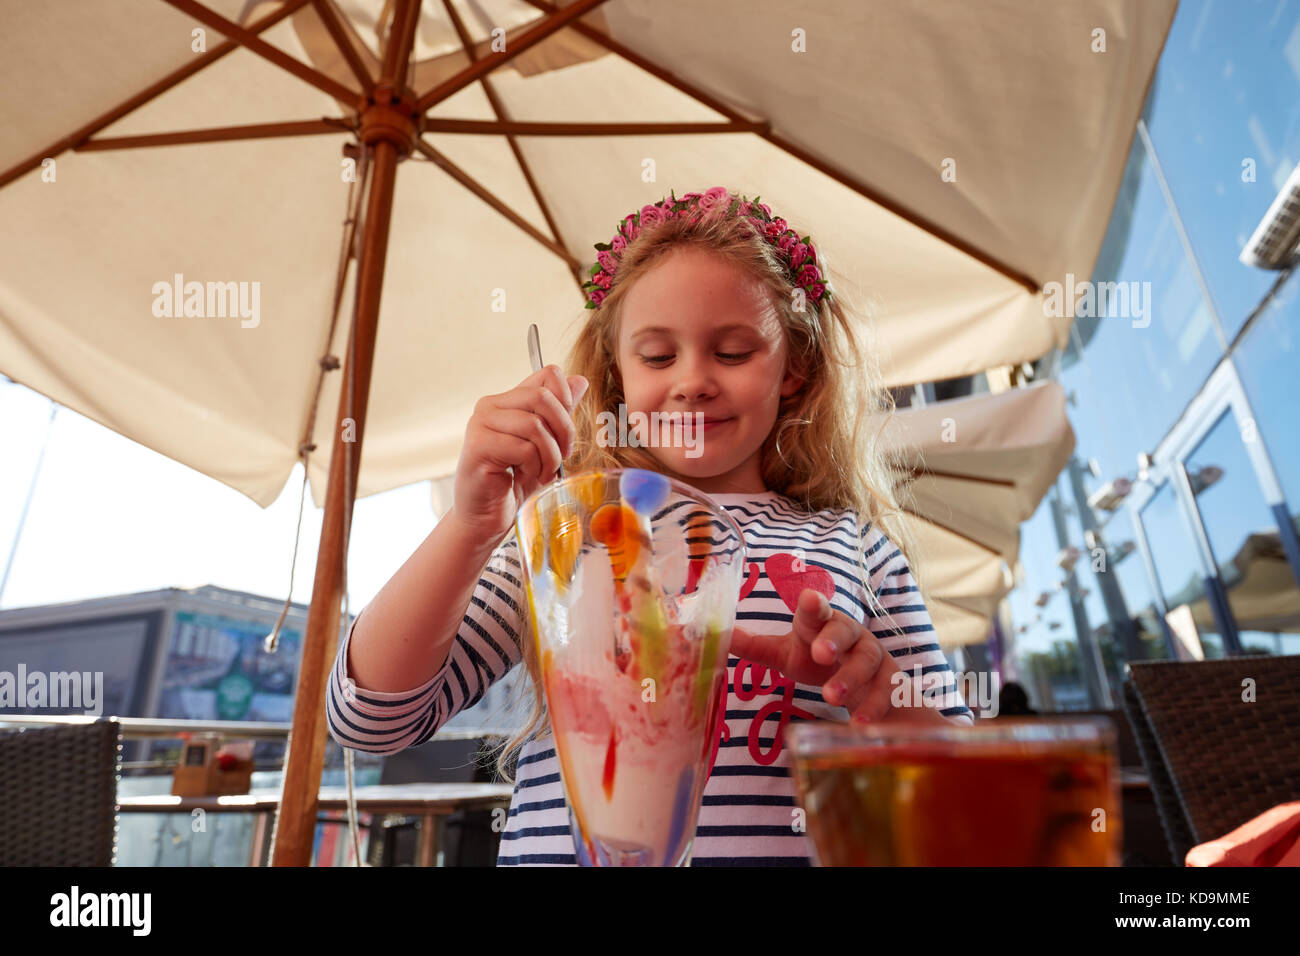 Little girl eating ice cream in outdoor cafe. Stock Photo